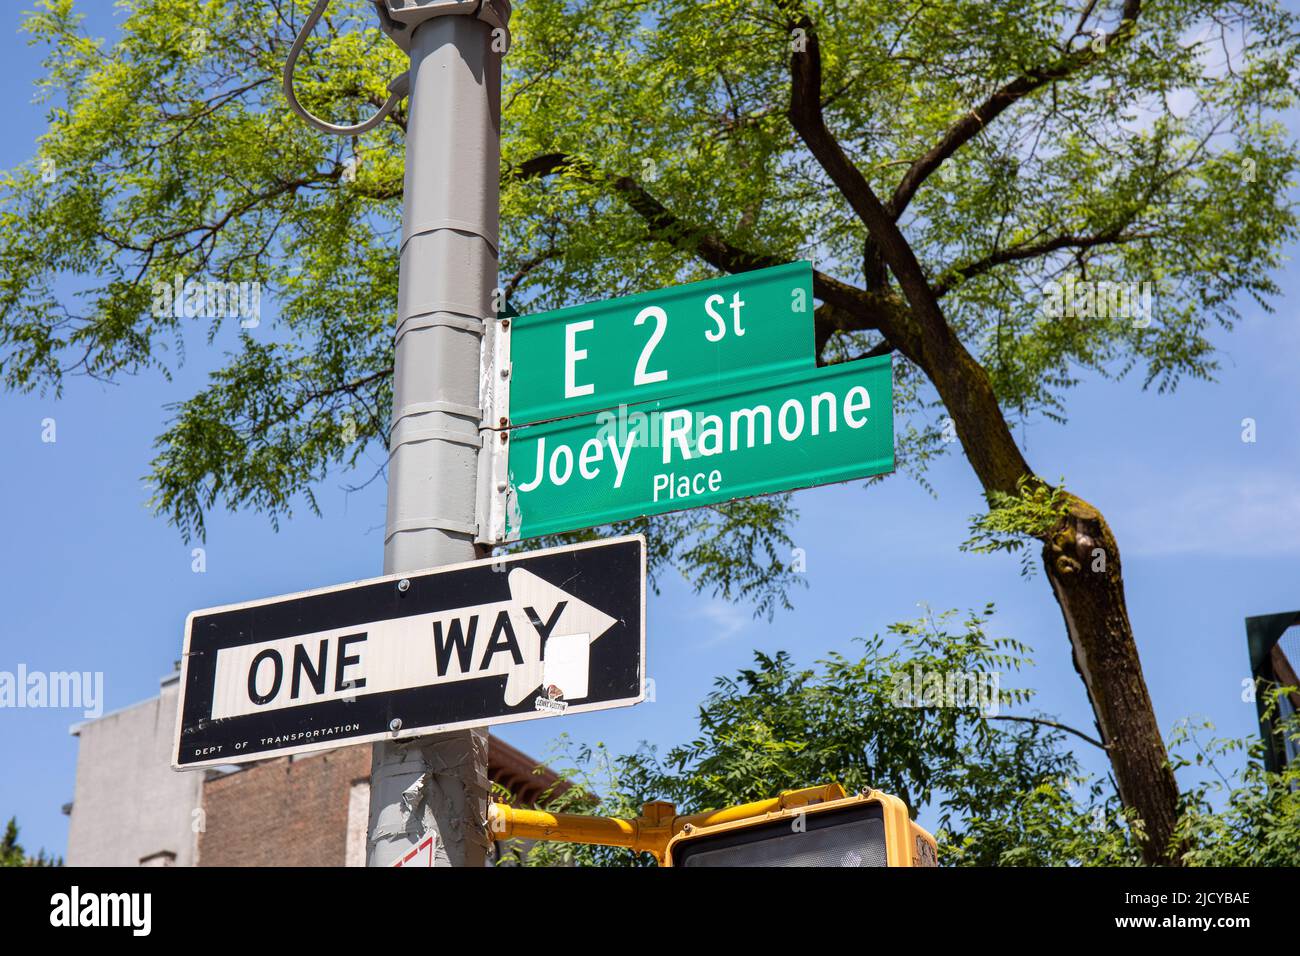 Joey Ramone Place street sign in Bowery, Lower East Side, East Village, New York City, United States of America Stock Photo